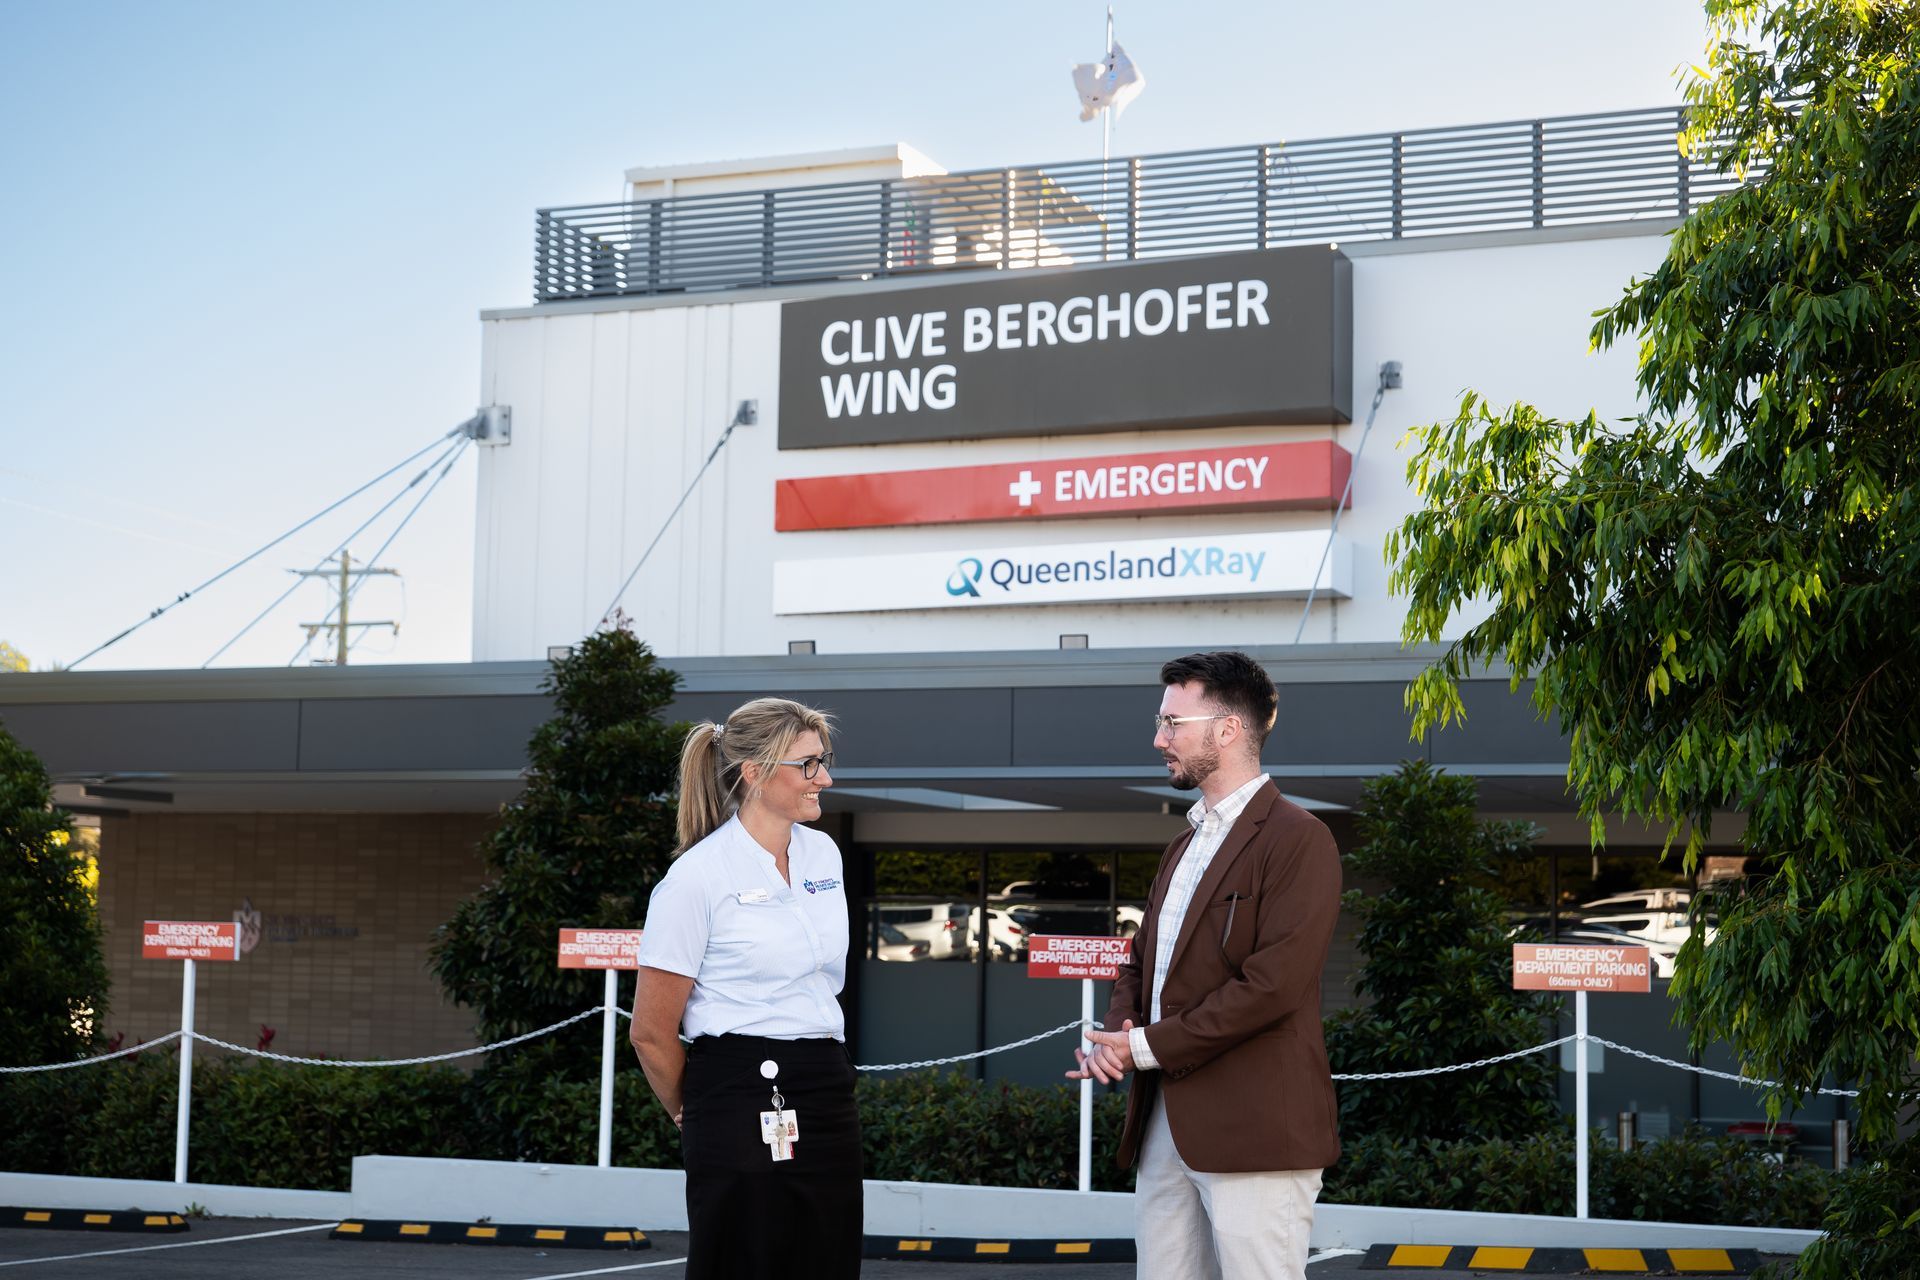 a man and a woman are standing in front of a building that says clive berghofer wing based in Toowoomba